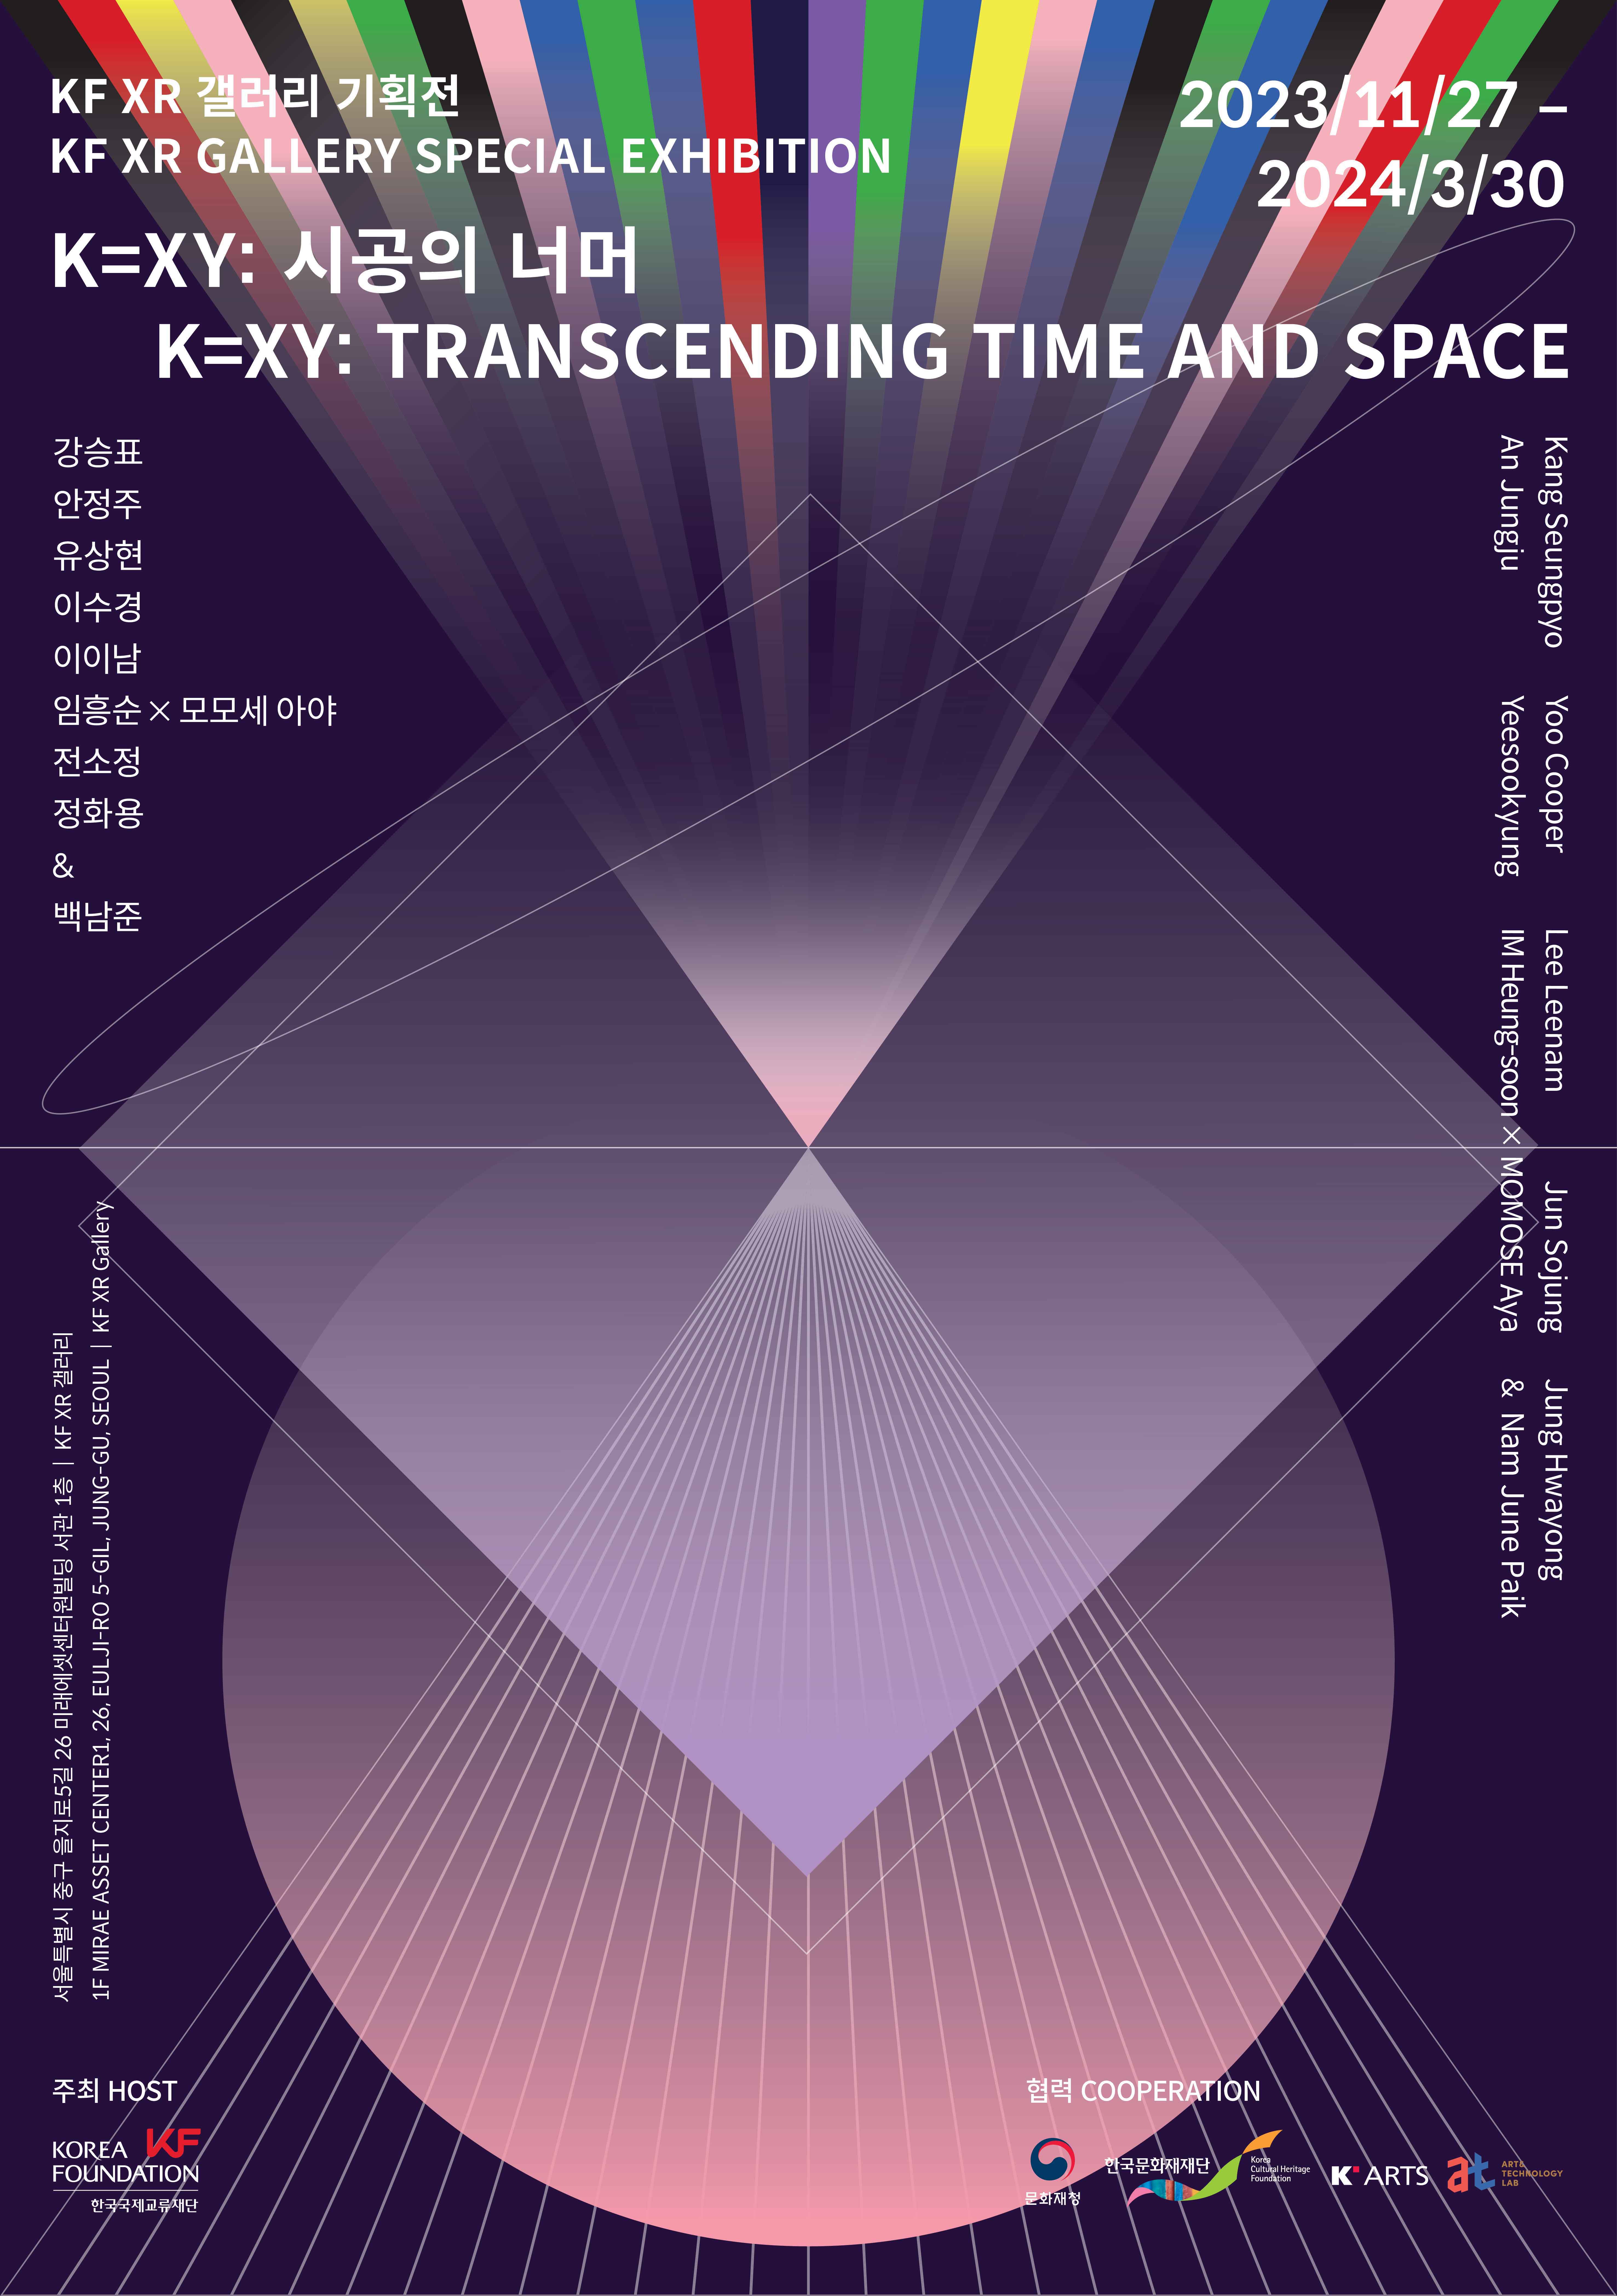 KF XR Gallery Special Exhibition “K=XY: Transcending Time and Space”